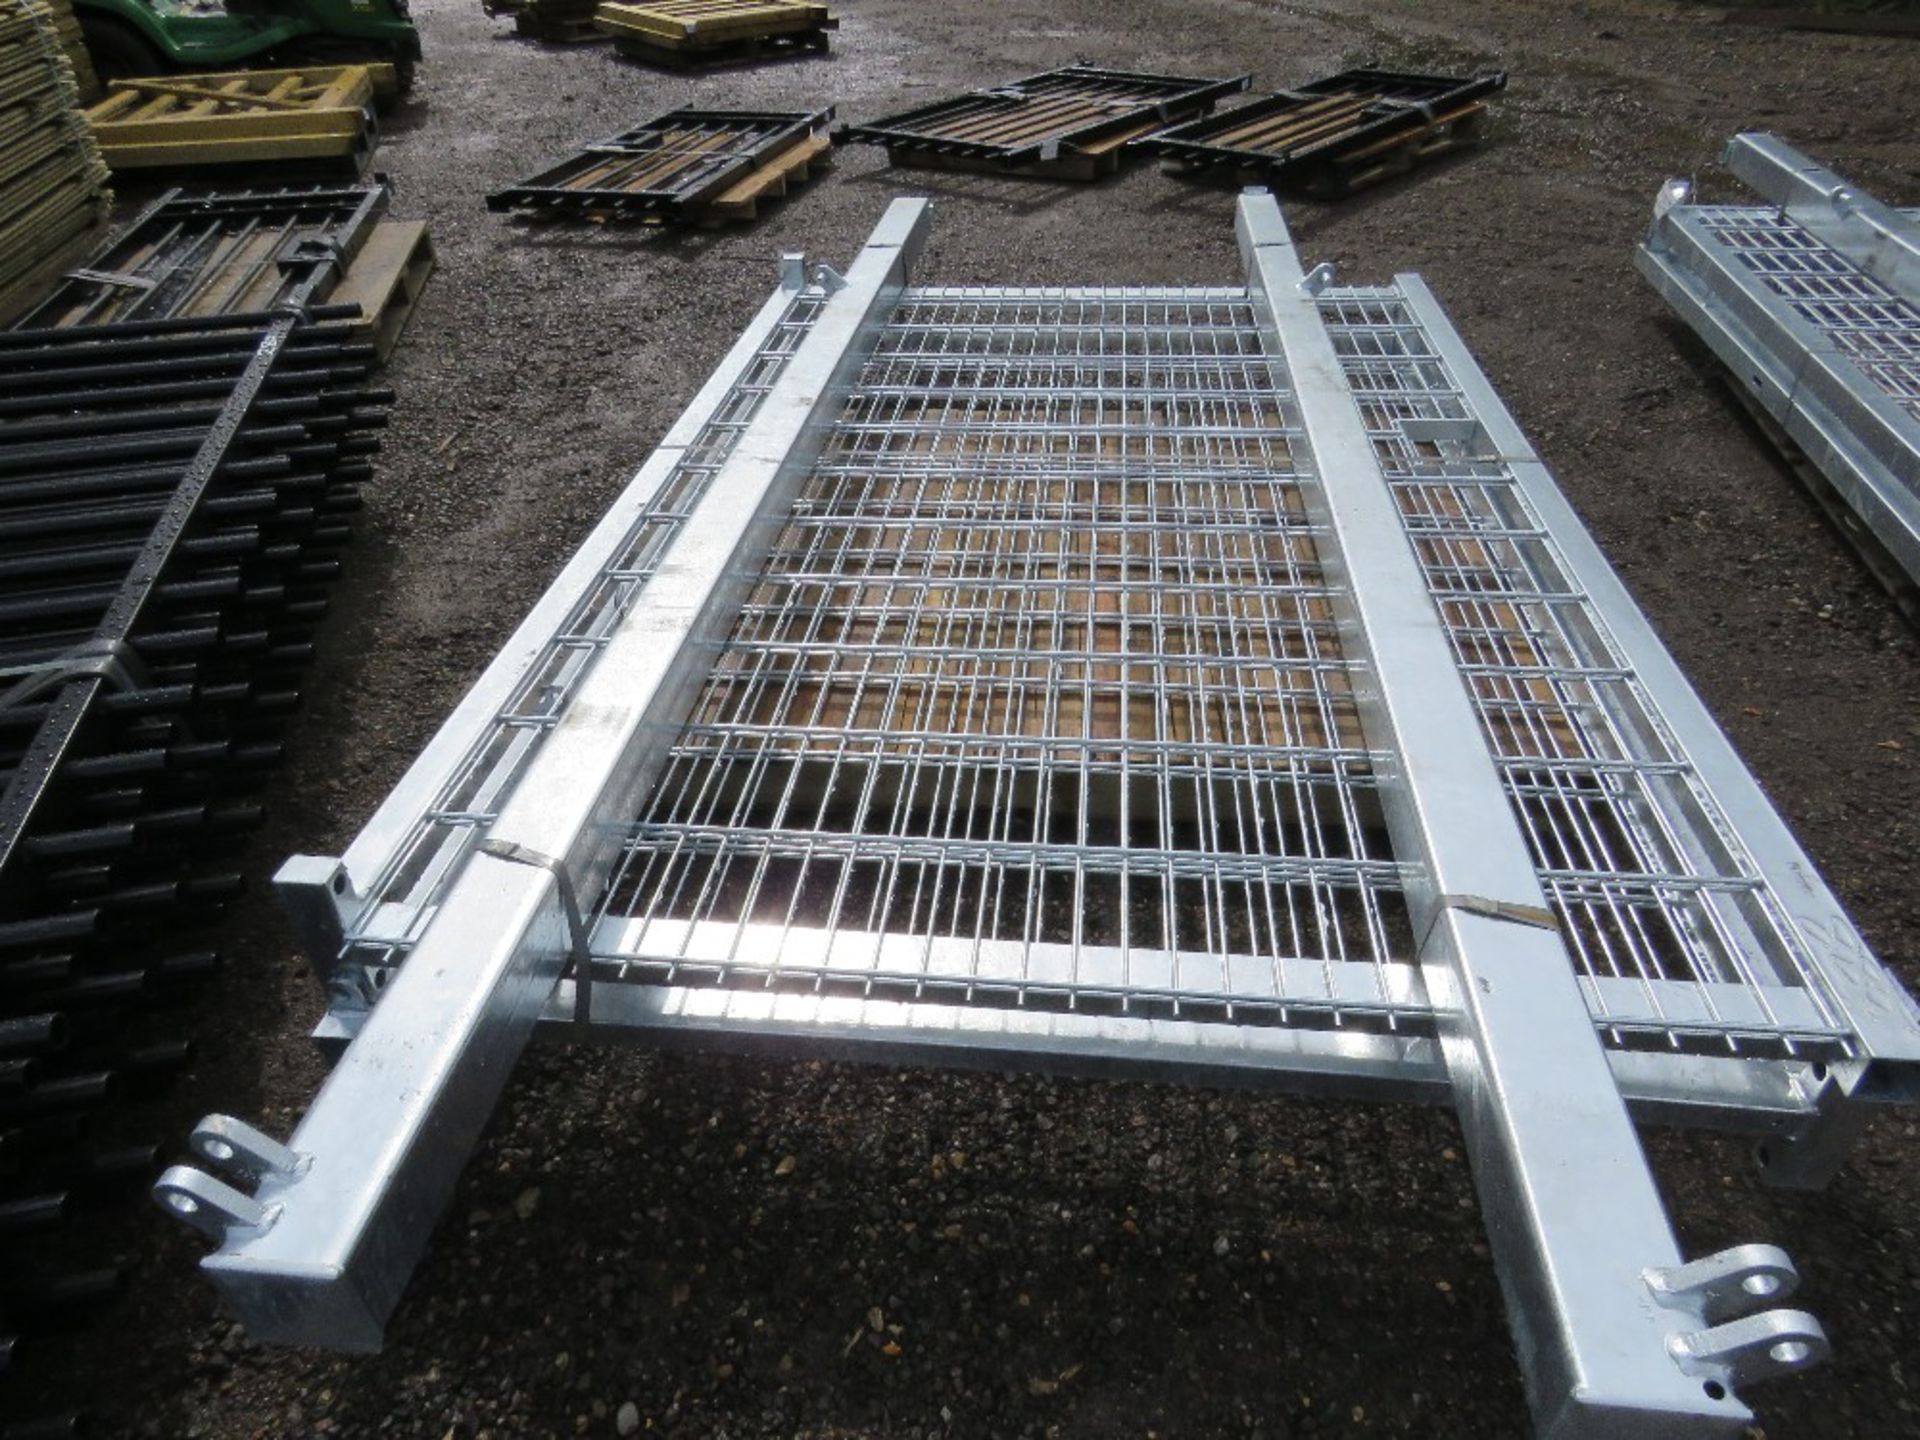 2 X EUROGARD GALVANISED GATES WITH POSTS. 2.3M HEIGHT X 1.6M WIDE EACH. - Image 2 of 4